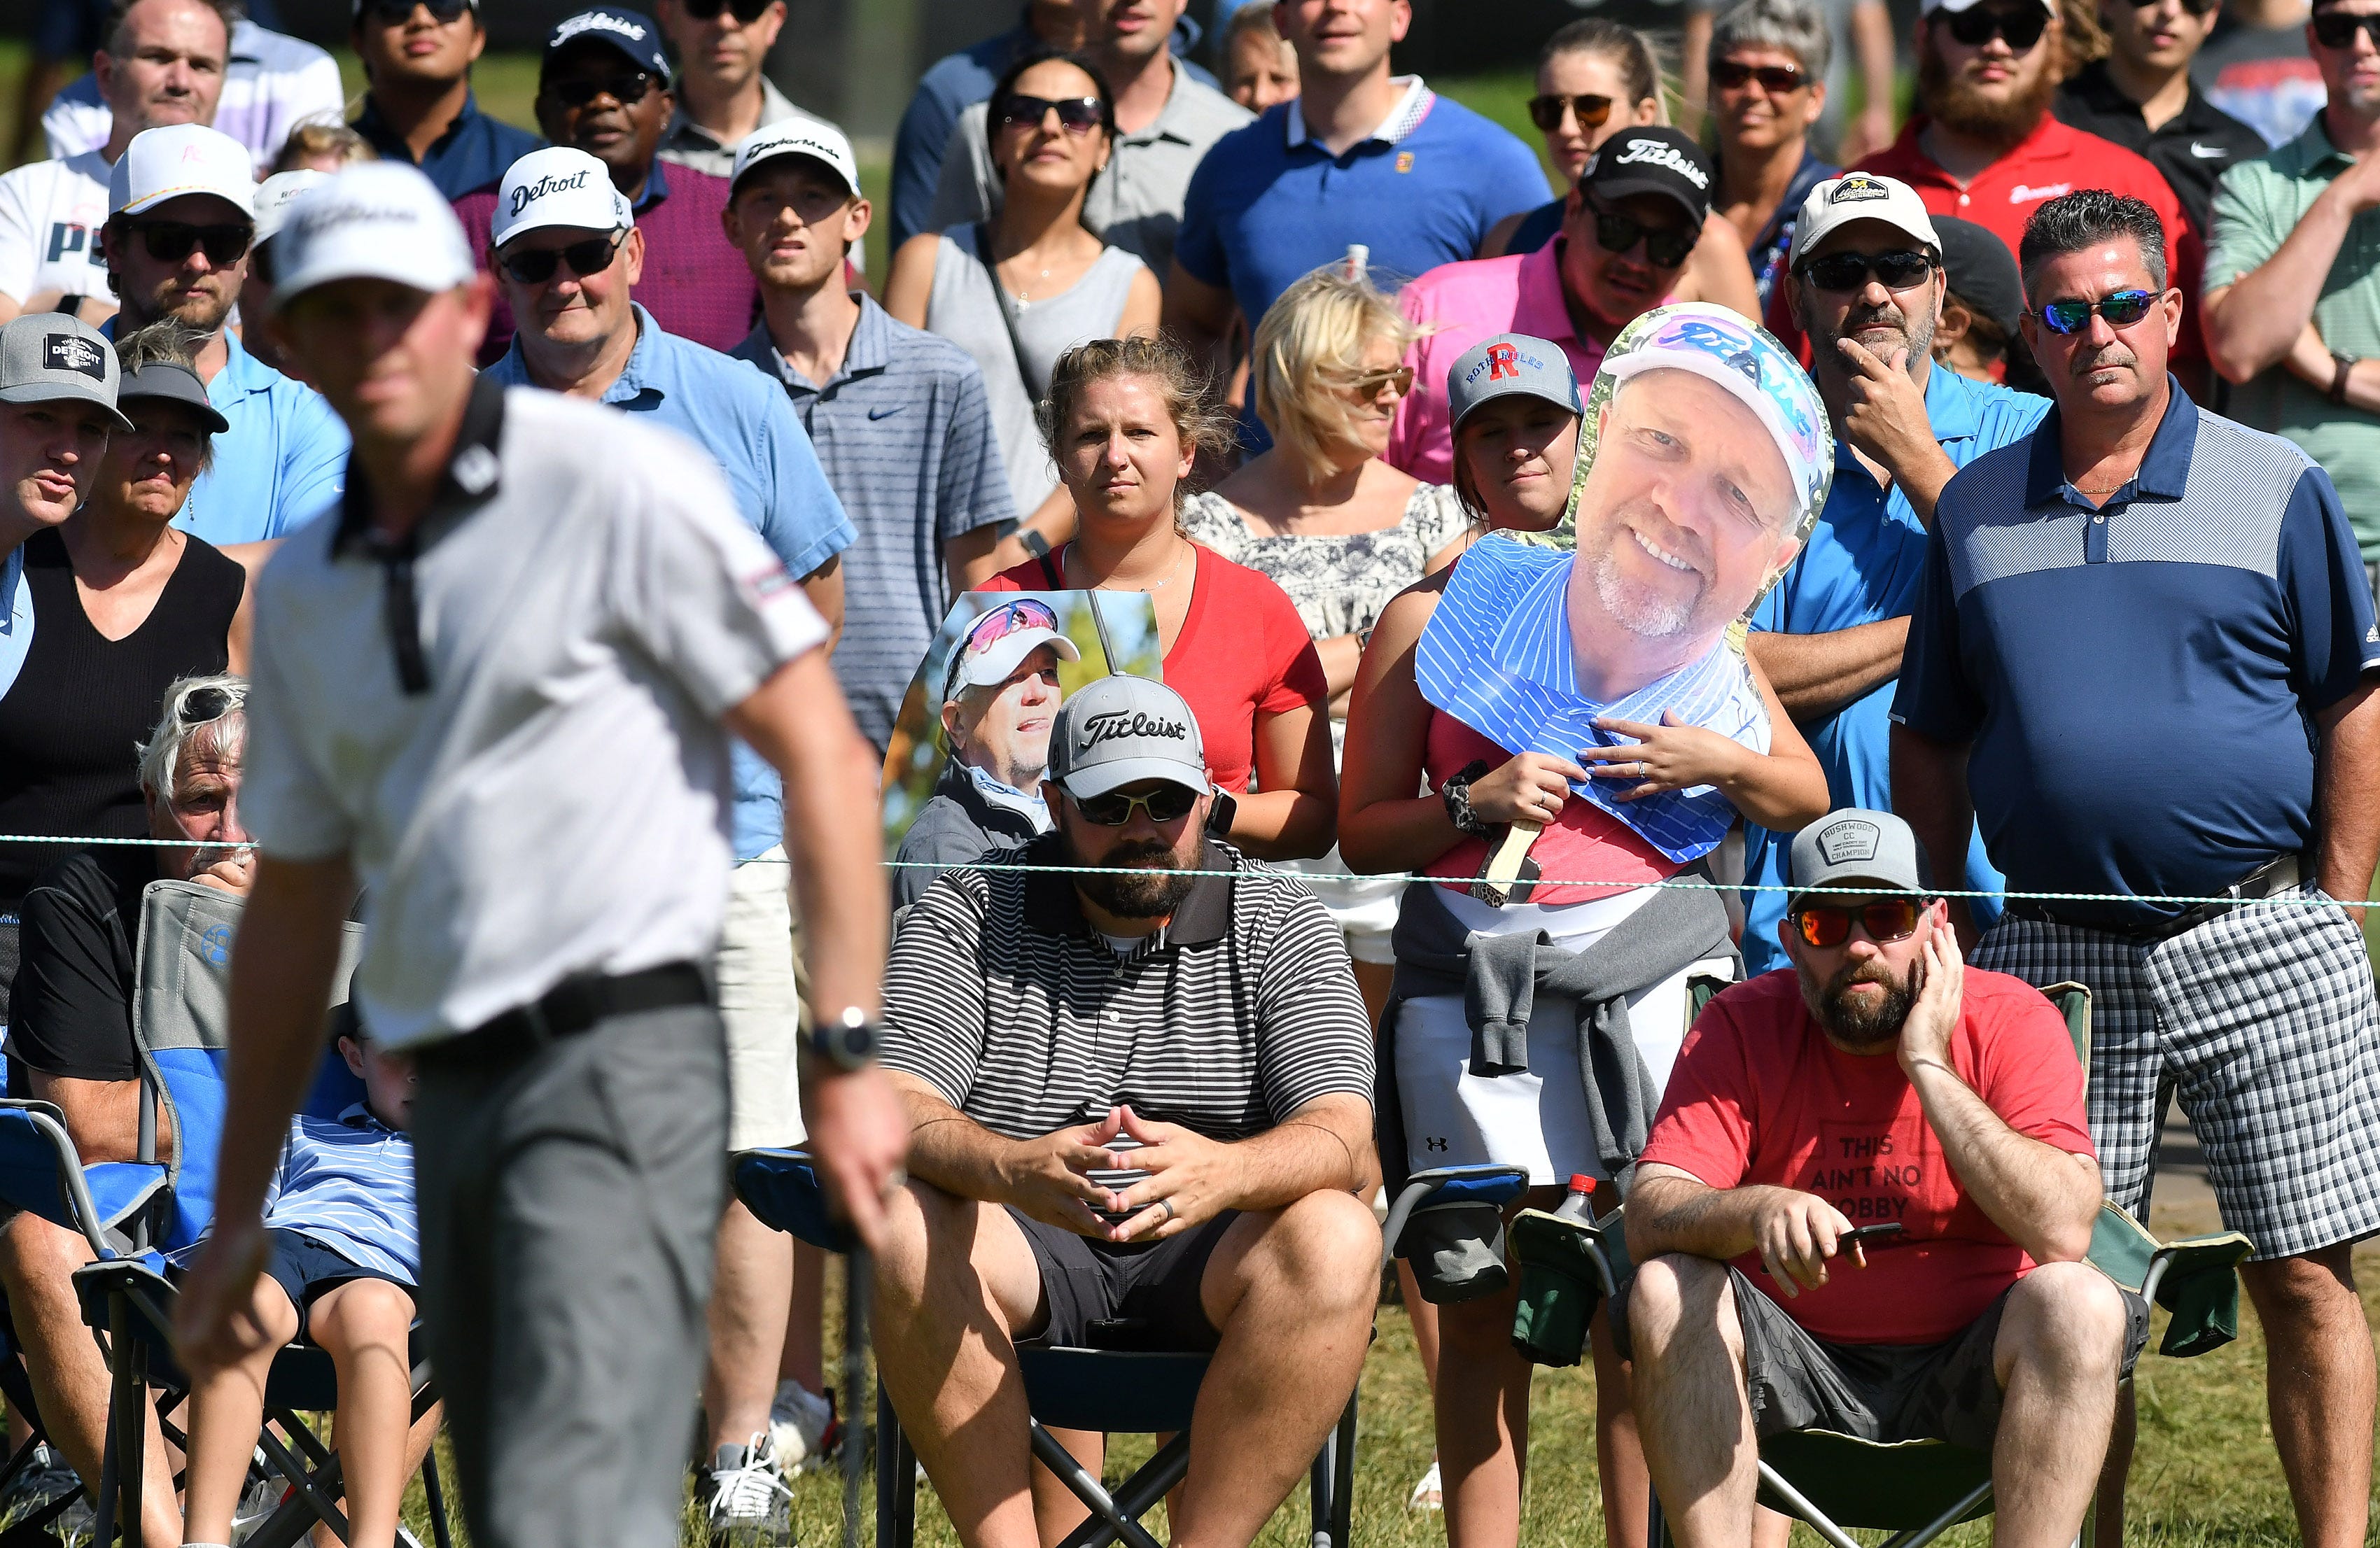 From left, sisters Megan Roth, 25, of Livonia and Michelle Roth, 27, of Farmington, New Mexico hold large photos of their dad, PGA player Jeff Roth, as he plays, not shown, on the 18th green.